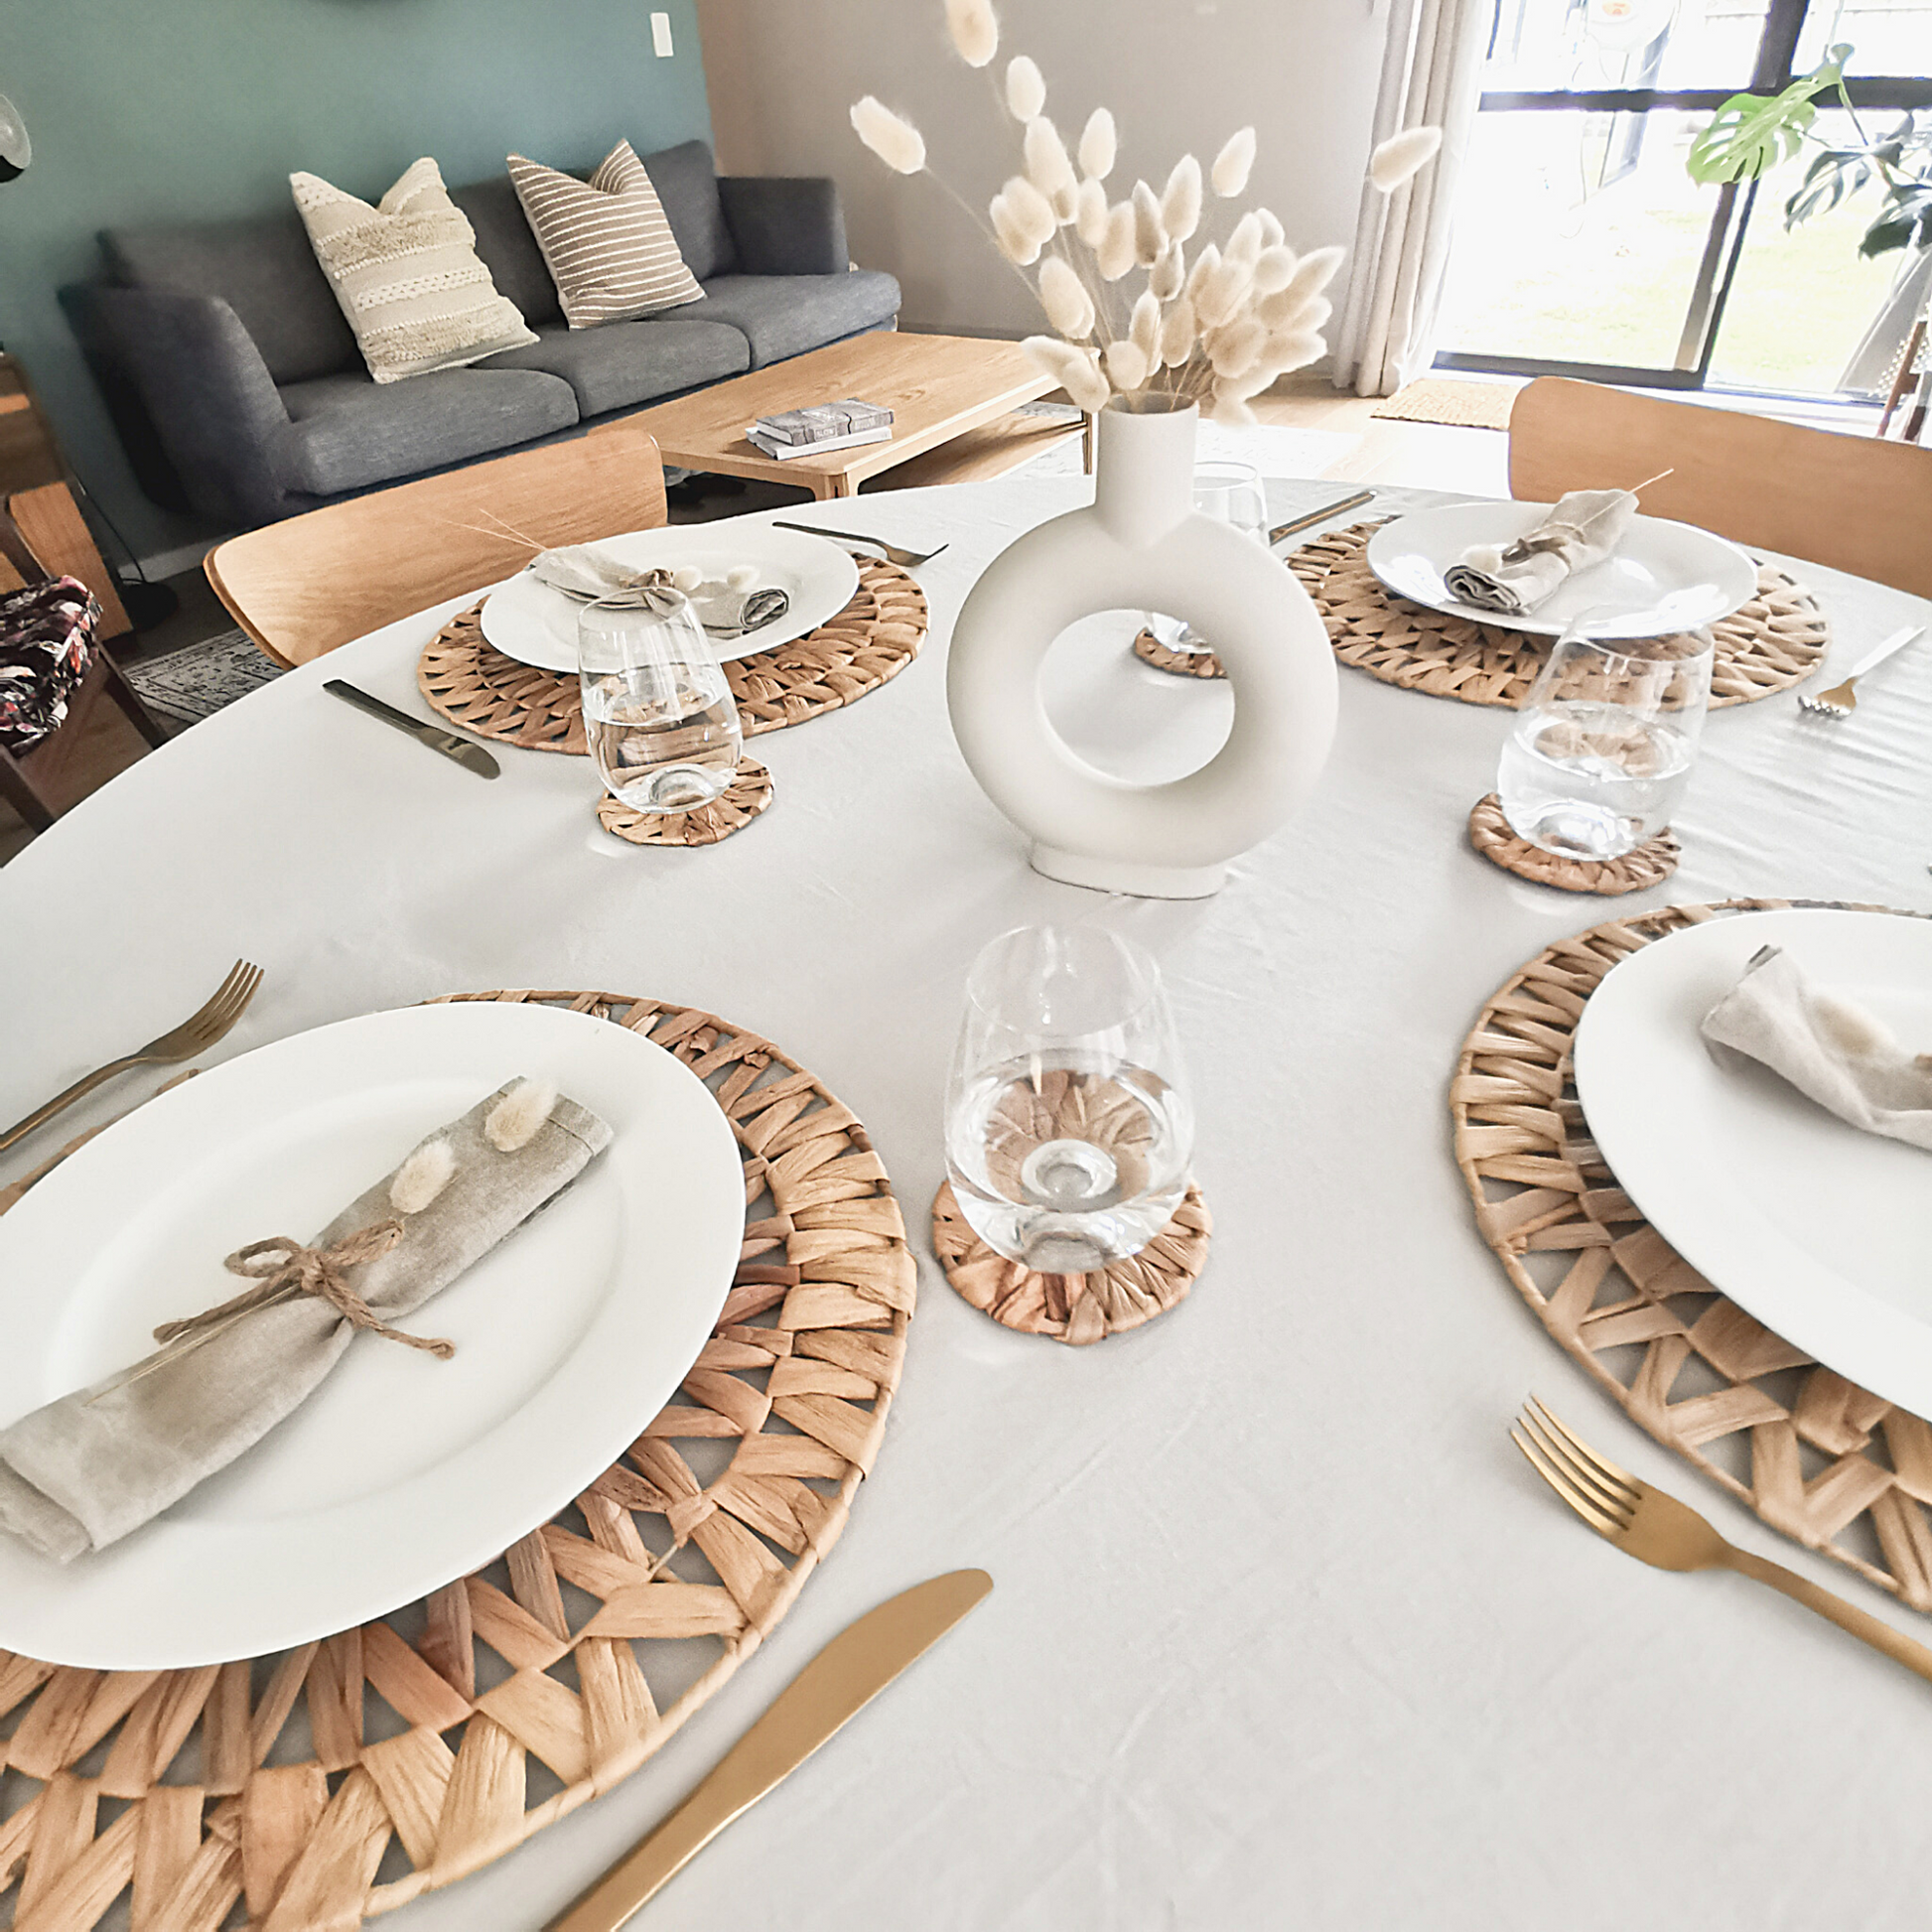 Woven placemats styled to create a boho dining table with pampas grass, nordic vase, and gold utensils